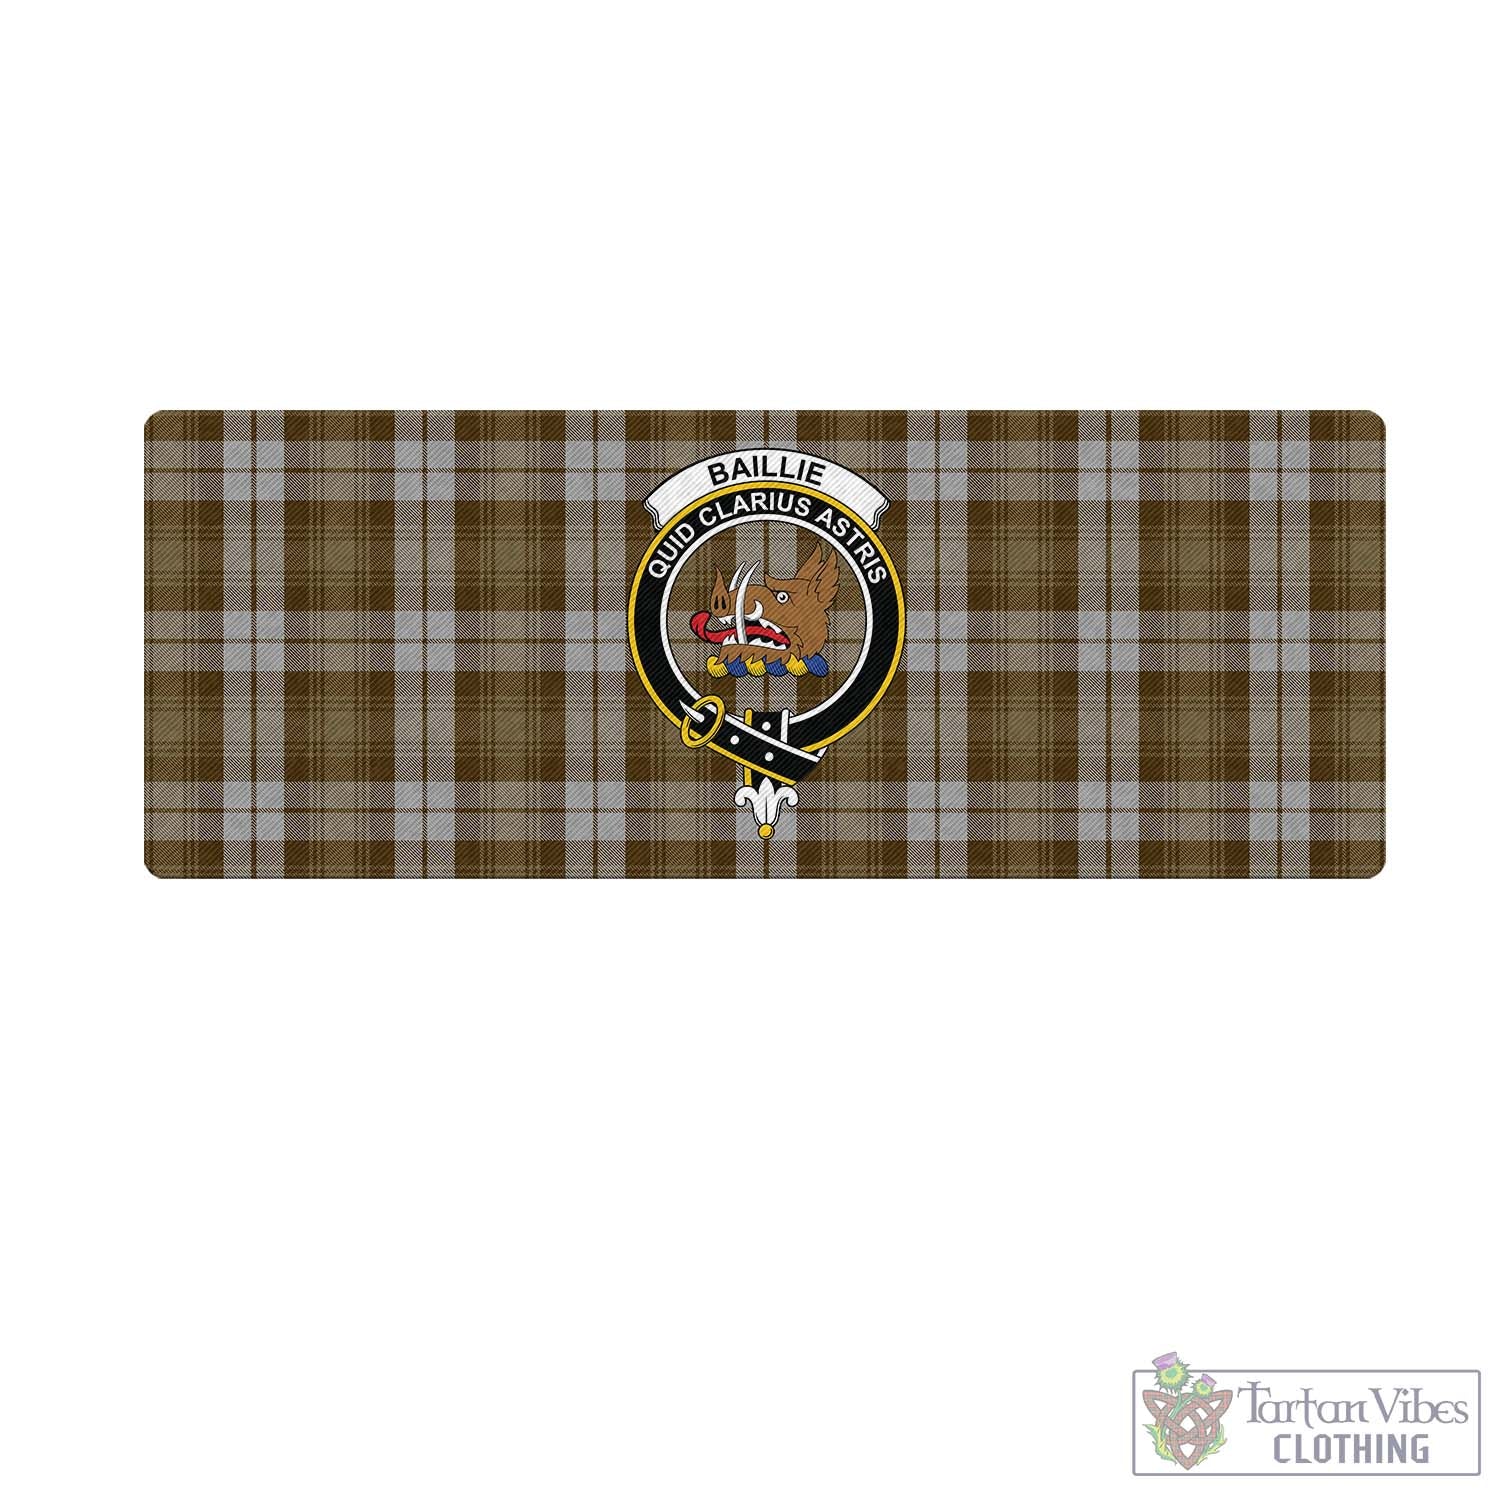 Tartan Vibes Clothing Baillie Dress Tartan Mouse Pad with Family Crest